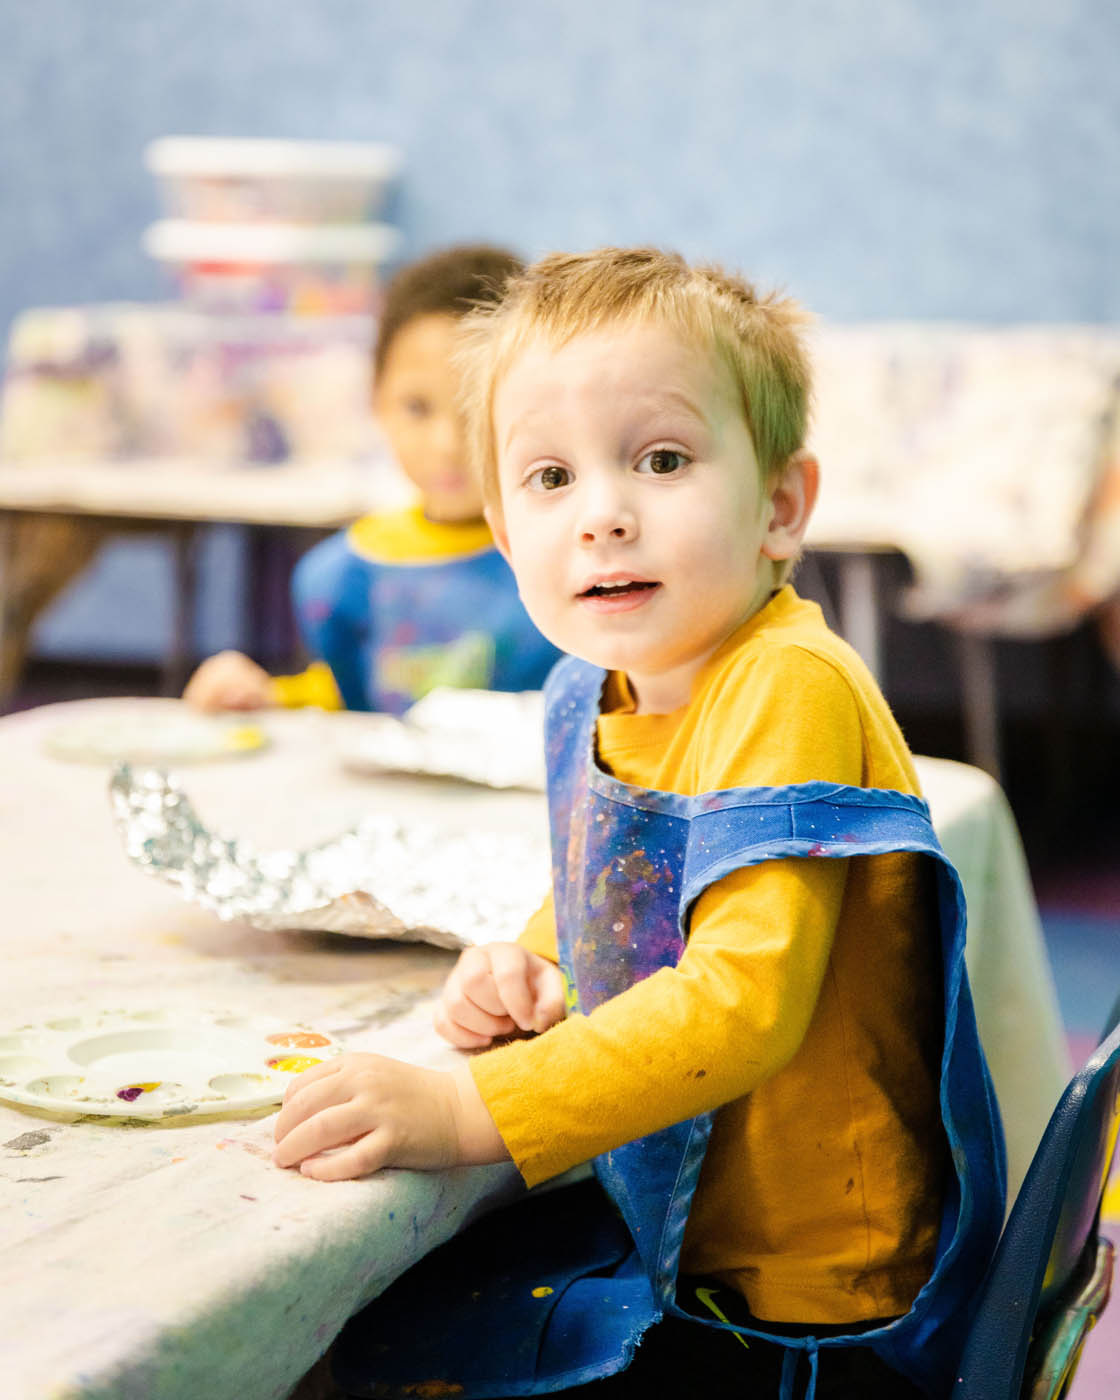 A boy in a yellow shirt in a Katy toddler art class at Romp n' Roll.